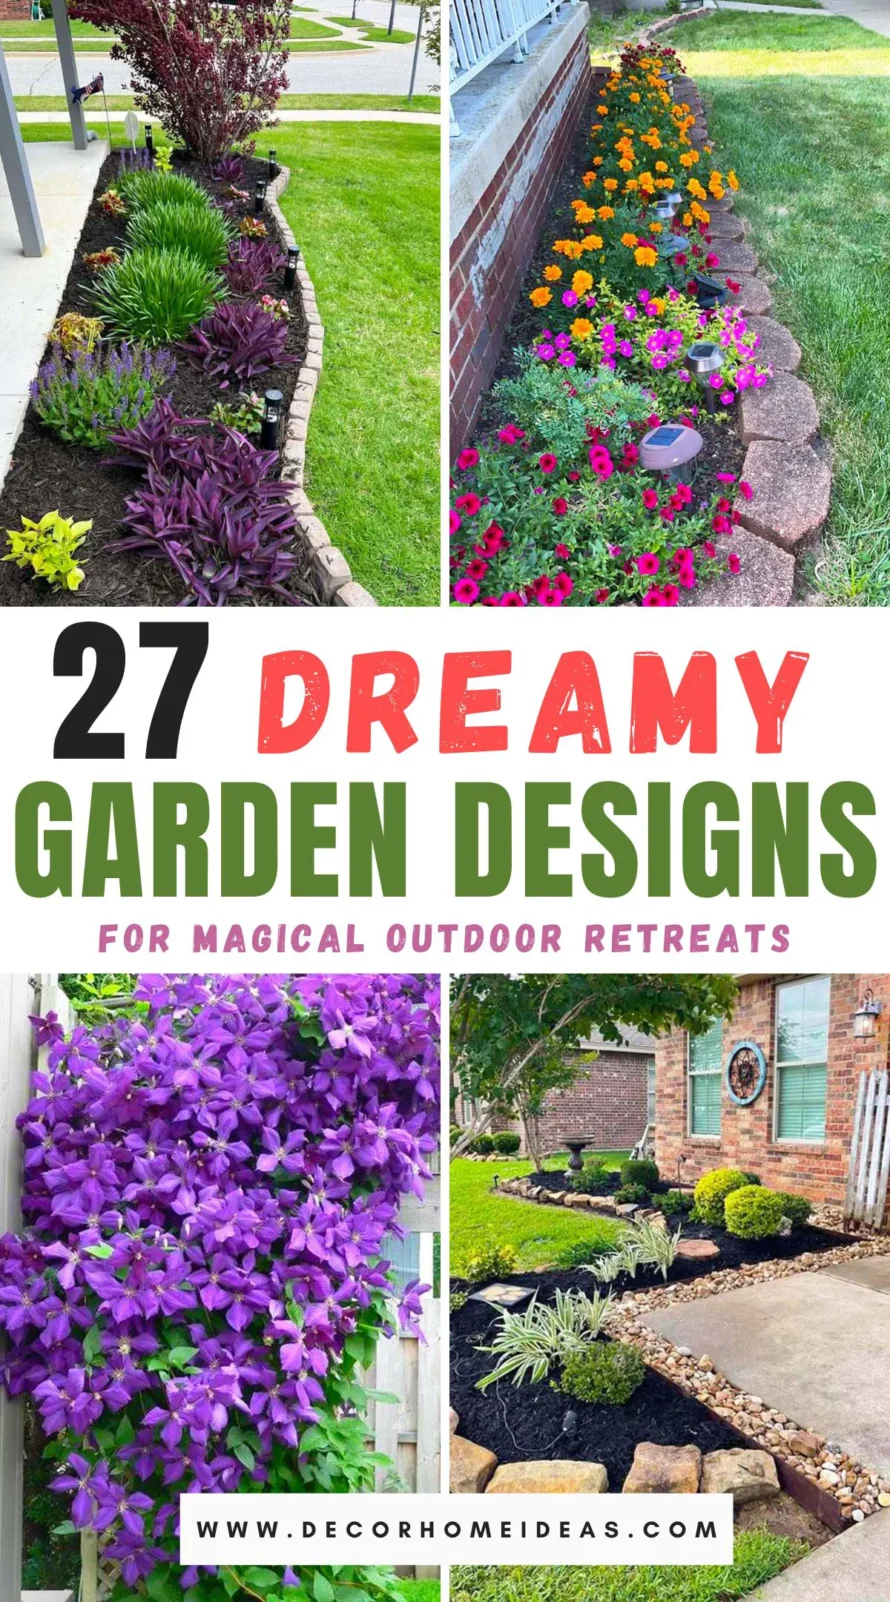 Explore 27 enchanting garden designs that transform any outdoor space into a magical retreat. From whimsical flower arrangements to serene water features, these ideas promise to inspire and rejuvenate. Dive in to discover your own slice of paradise!